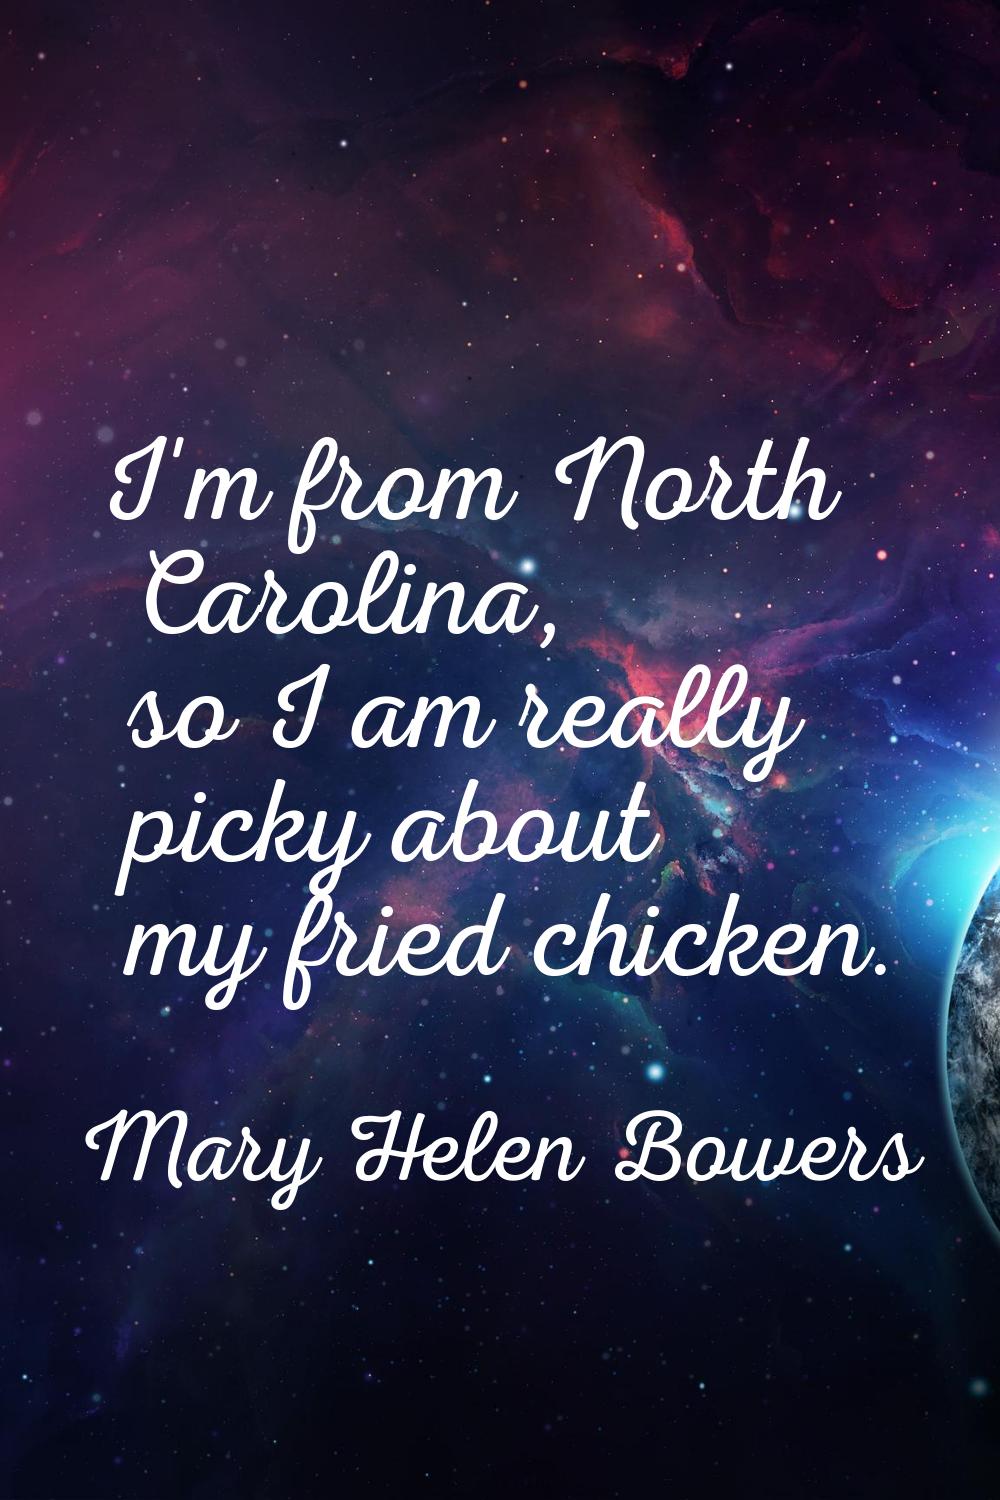 I'm from North Carolina, so I am really picky about my fried chicken.